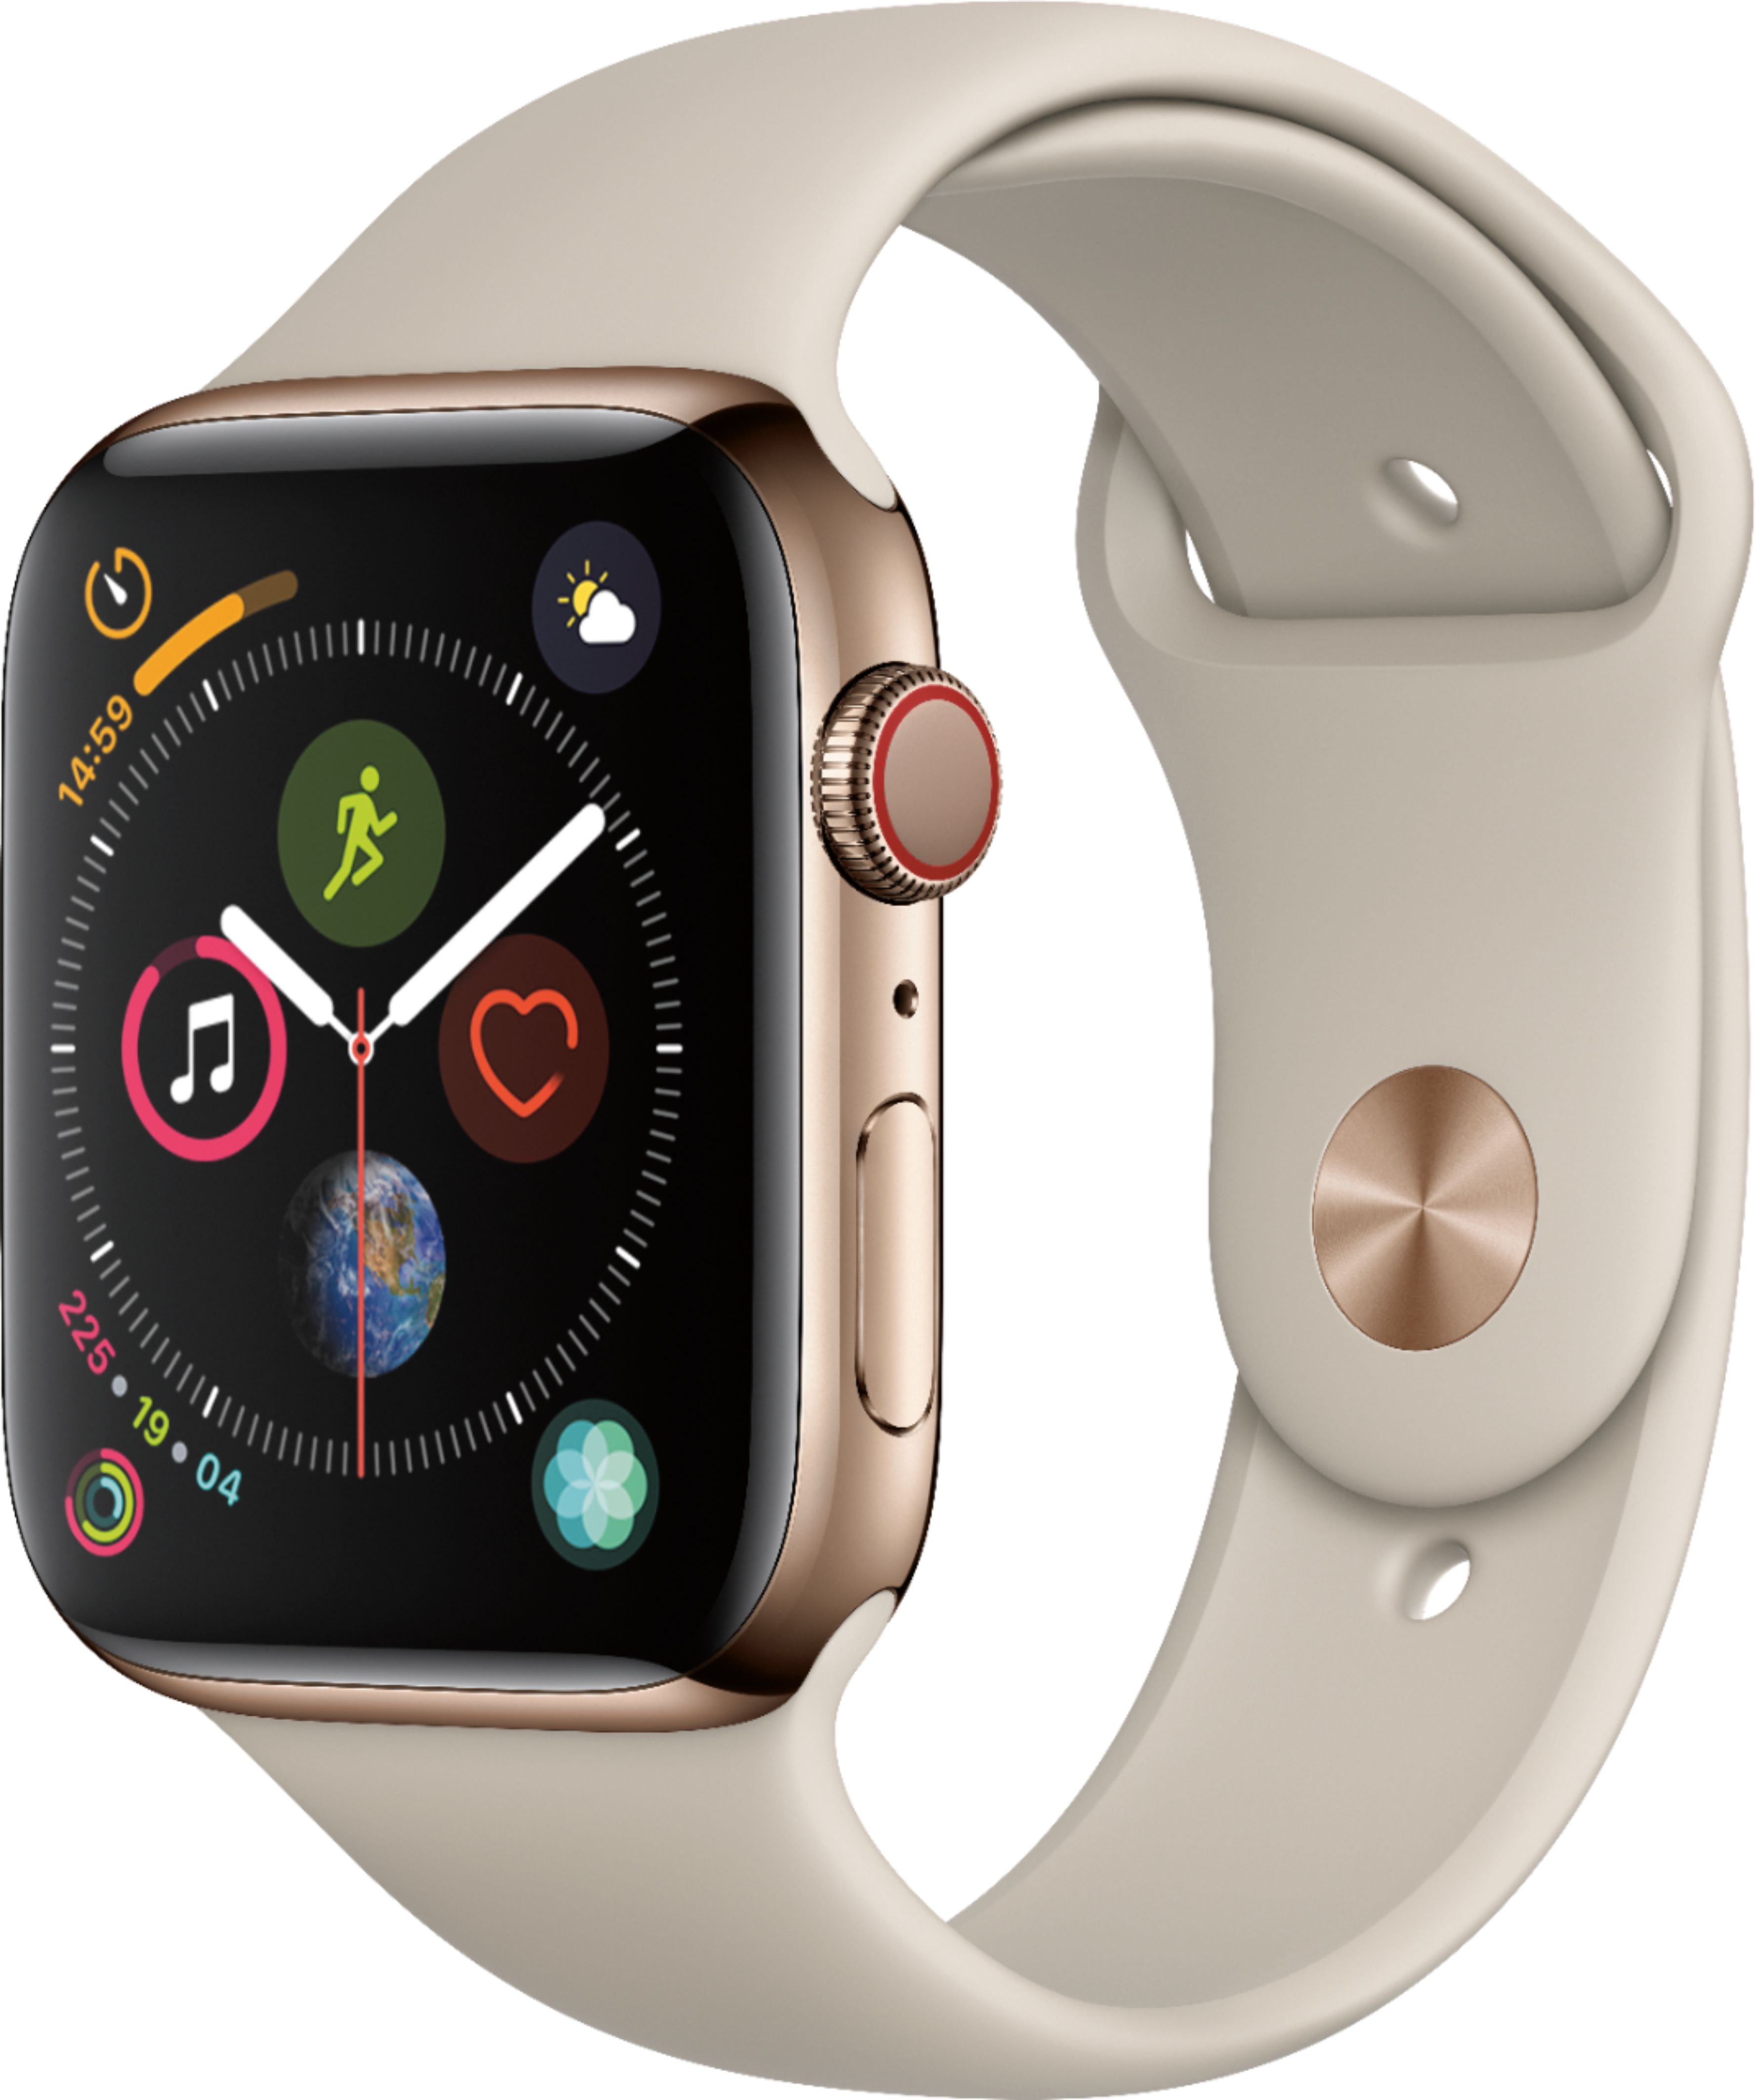 Apple Watch Series 4 (GPS + Cellular) 44mm Gold Stainless Steel Case with Stone Sport Band - Gold Stainless Steel